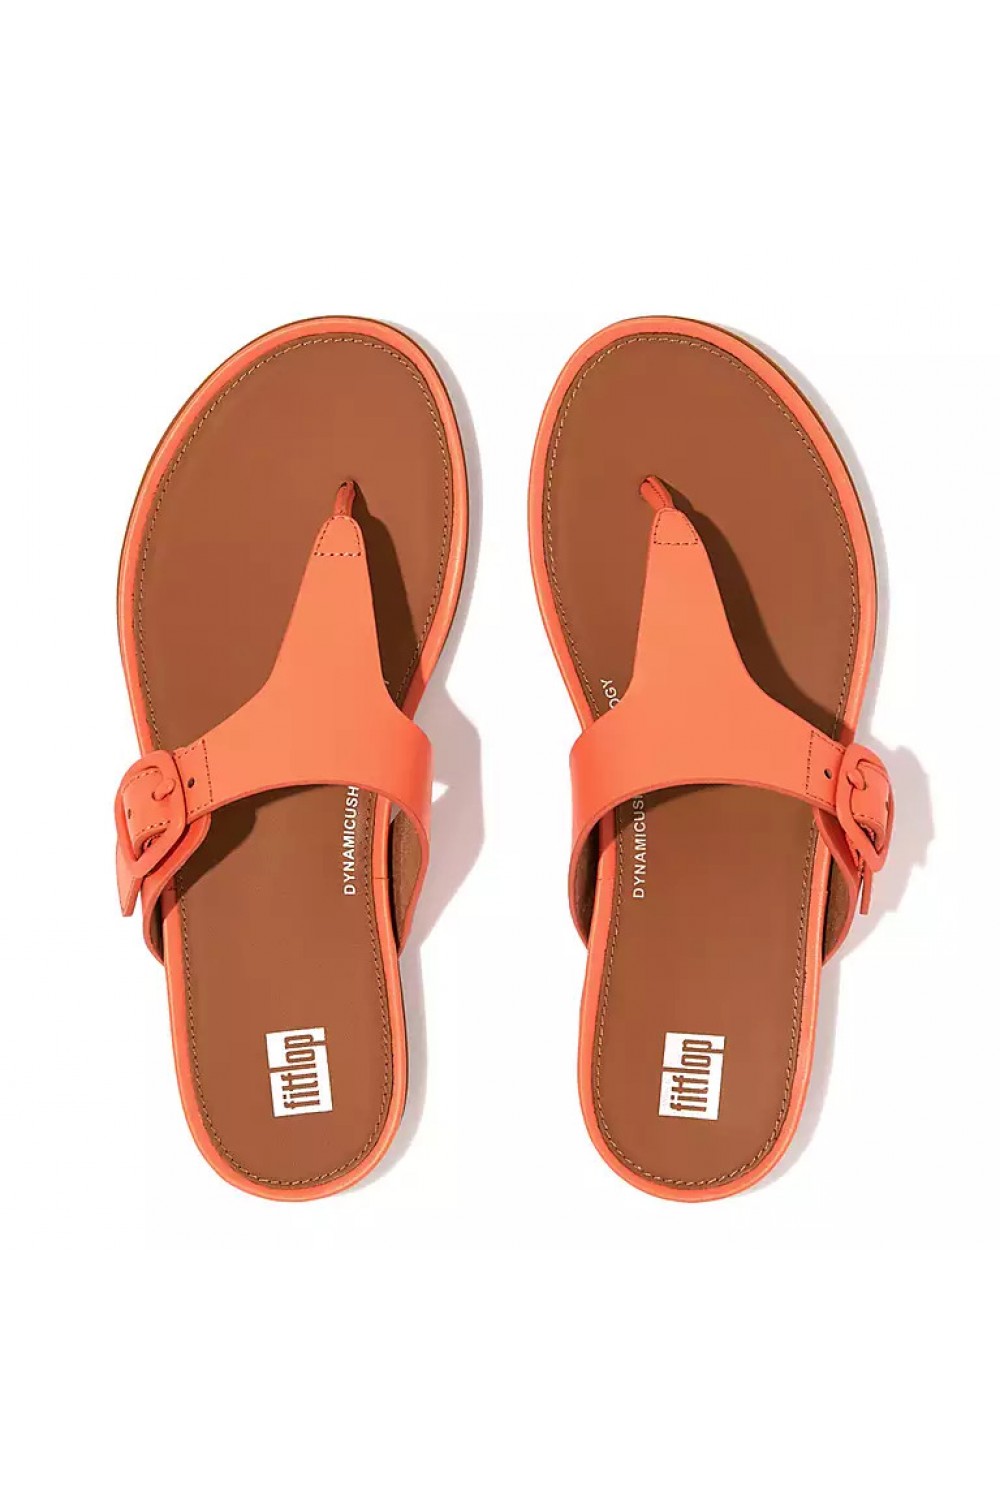 Fitflop GRACIE Matt-Buckle Leather Toe-Post Sandals Sunshine Coral